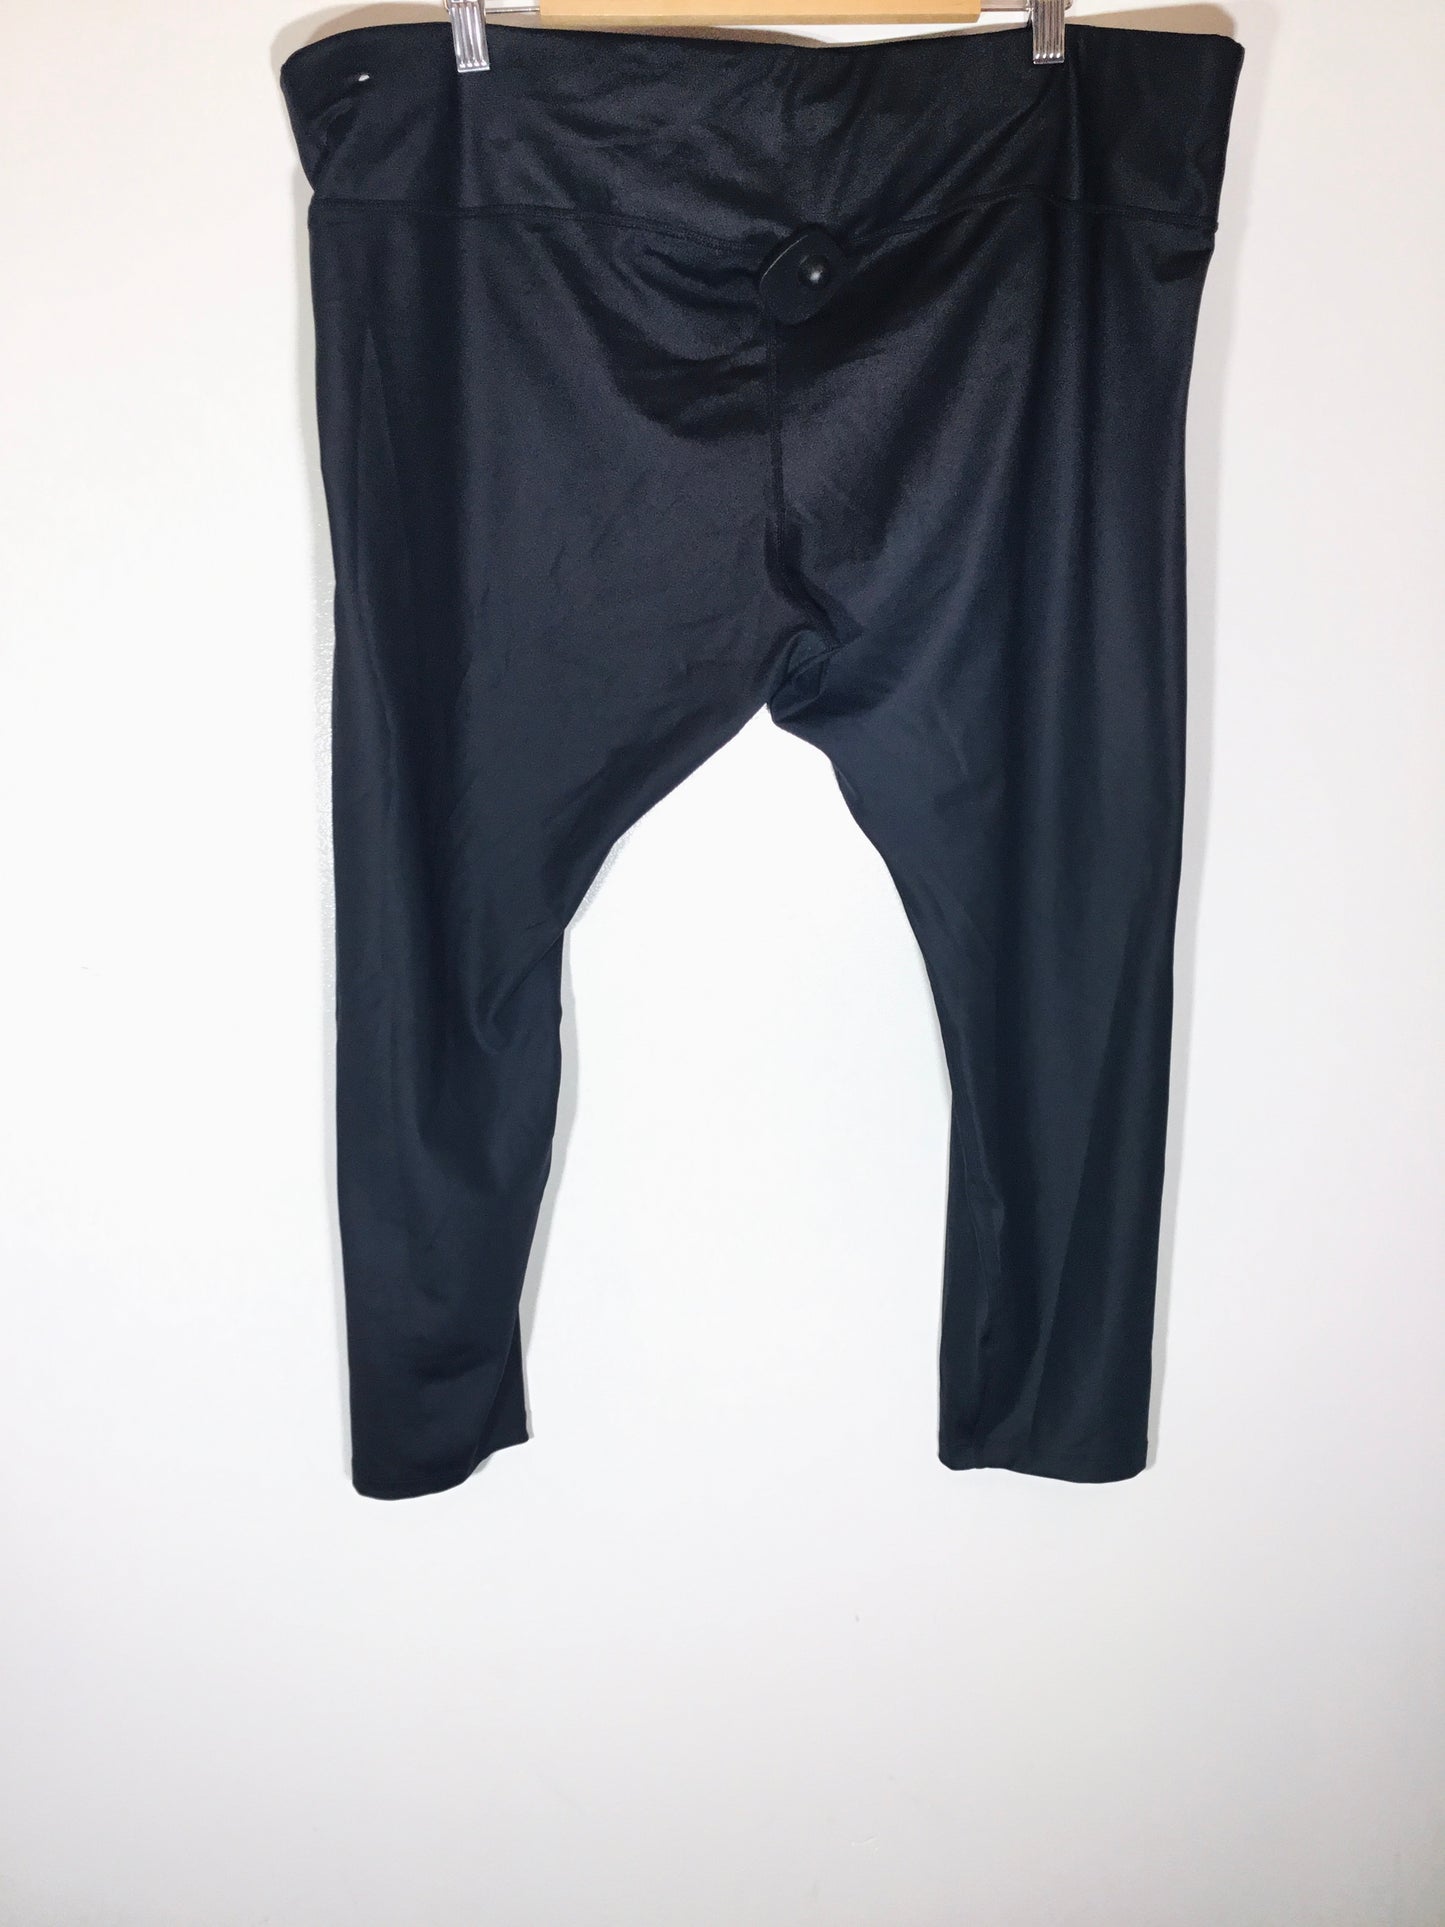 Athletic Leggings By Nike  Size: 3x